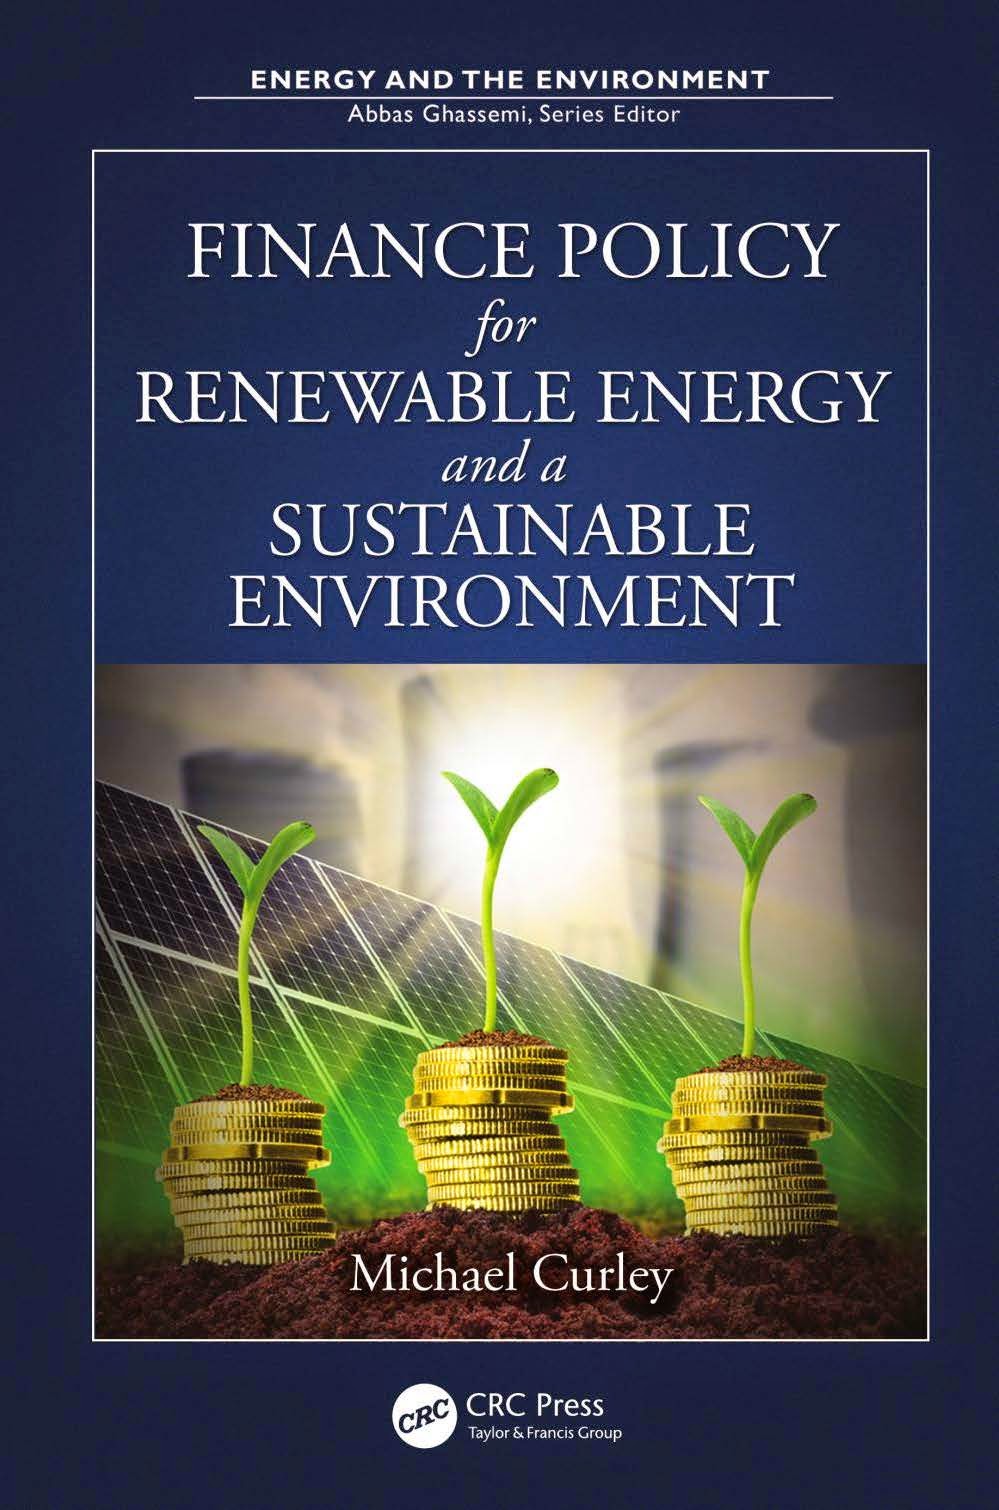 http://kingcheapebook.blogspot.com/2014/07/finance-policy-for-renewable-energy-and.html